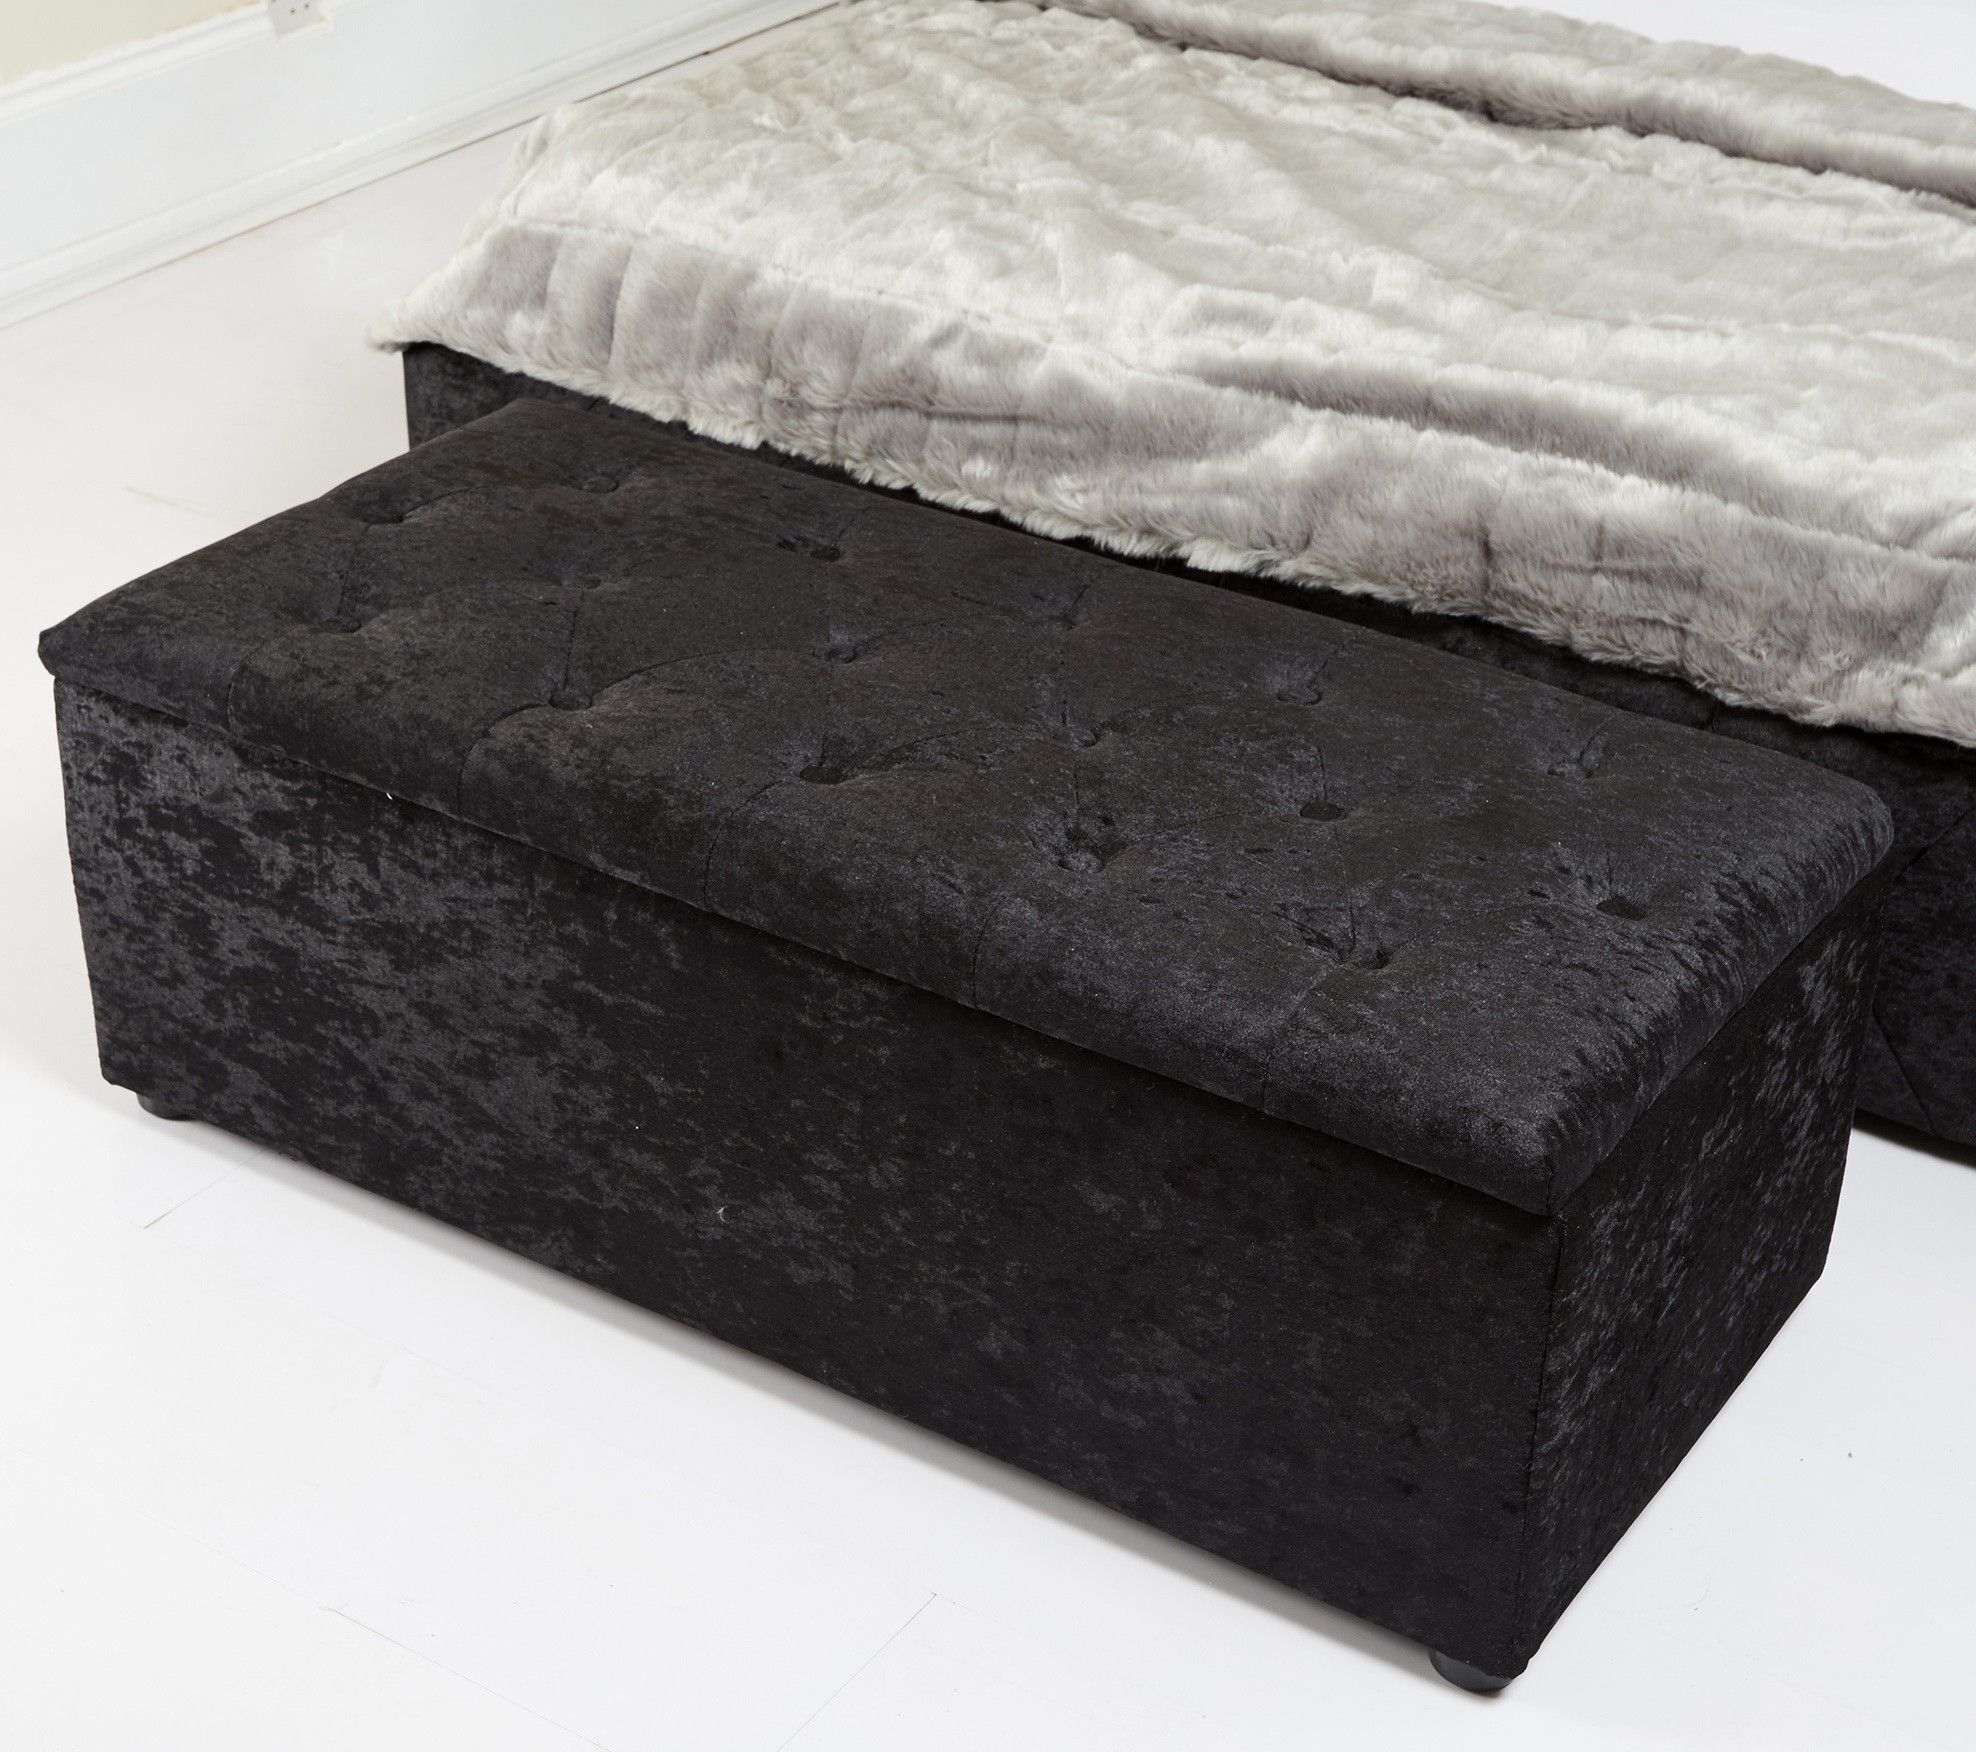 Ottoman Bed Box Storage Bedroom Linen Crushed Velvet Silver Grey Black For Current Gray Velvet Ottomans With Ample Storage (View 9 of 10)